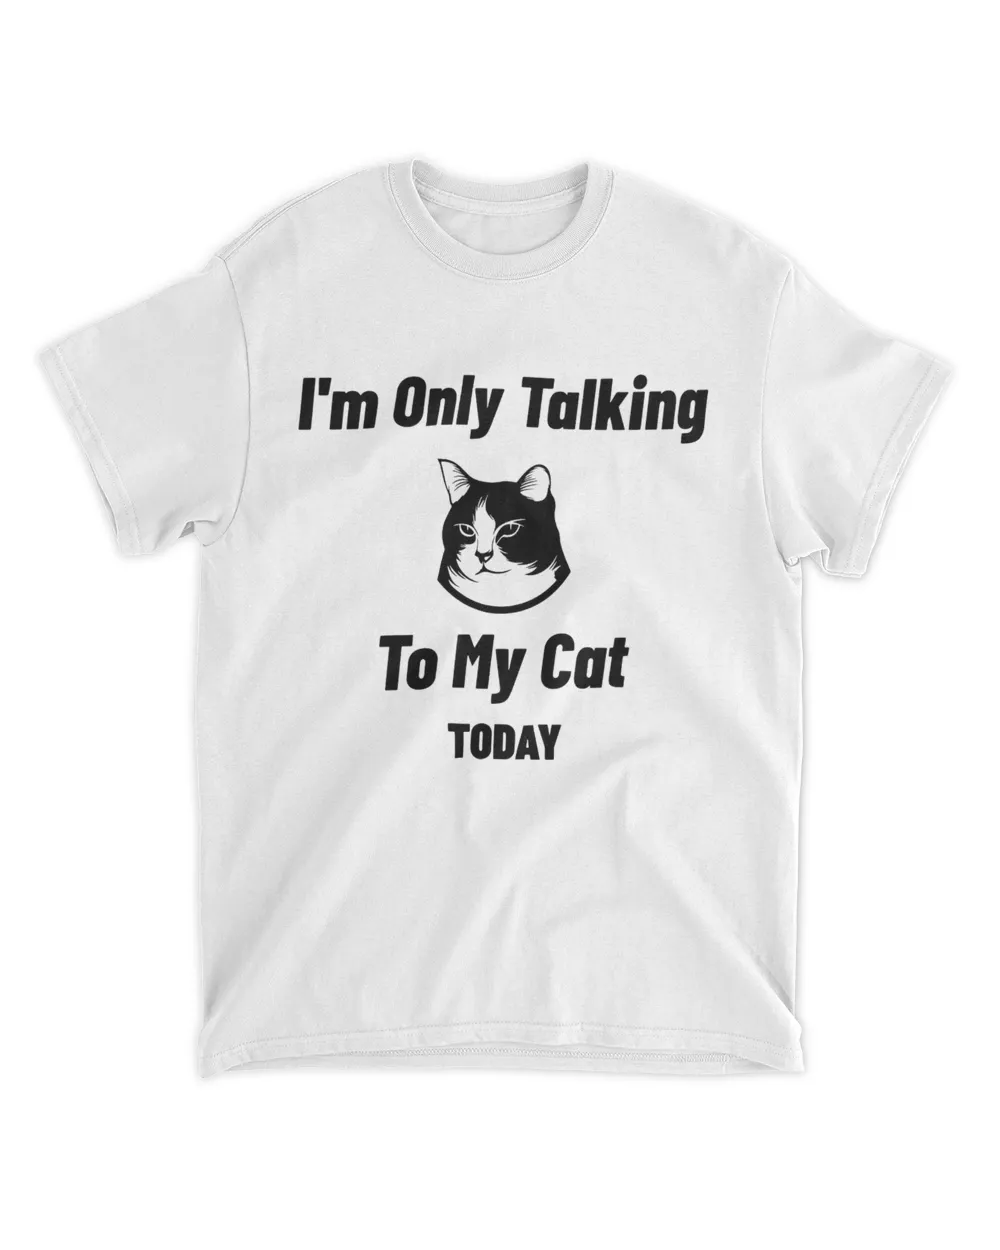 I'm Only Talking To My Cat Today Shirt